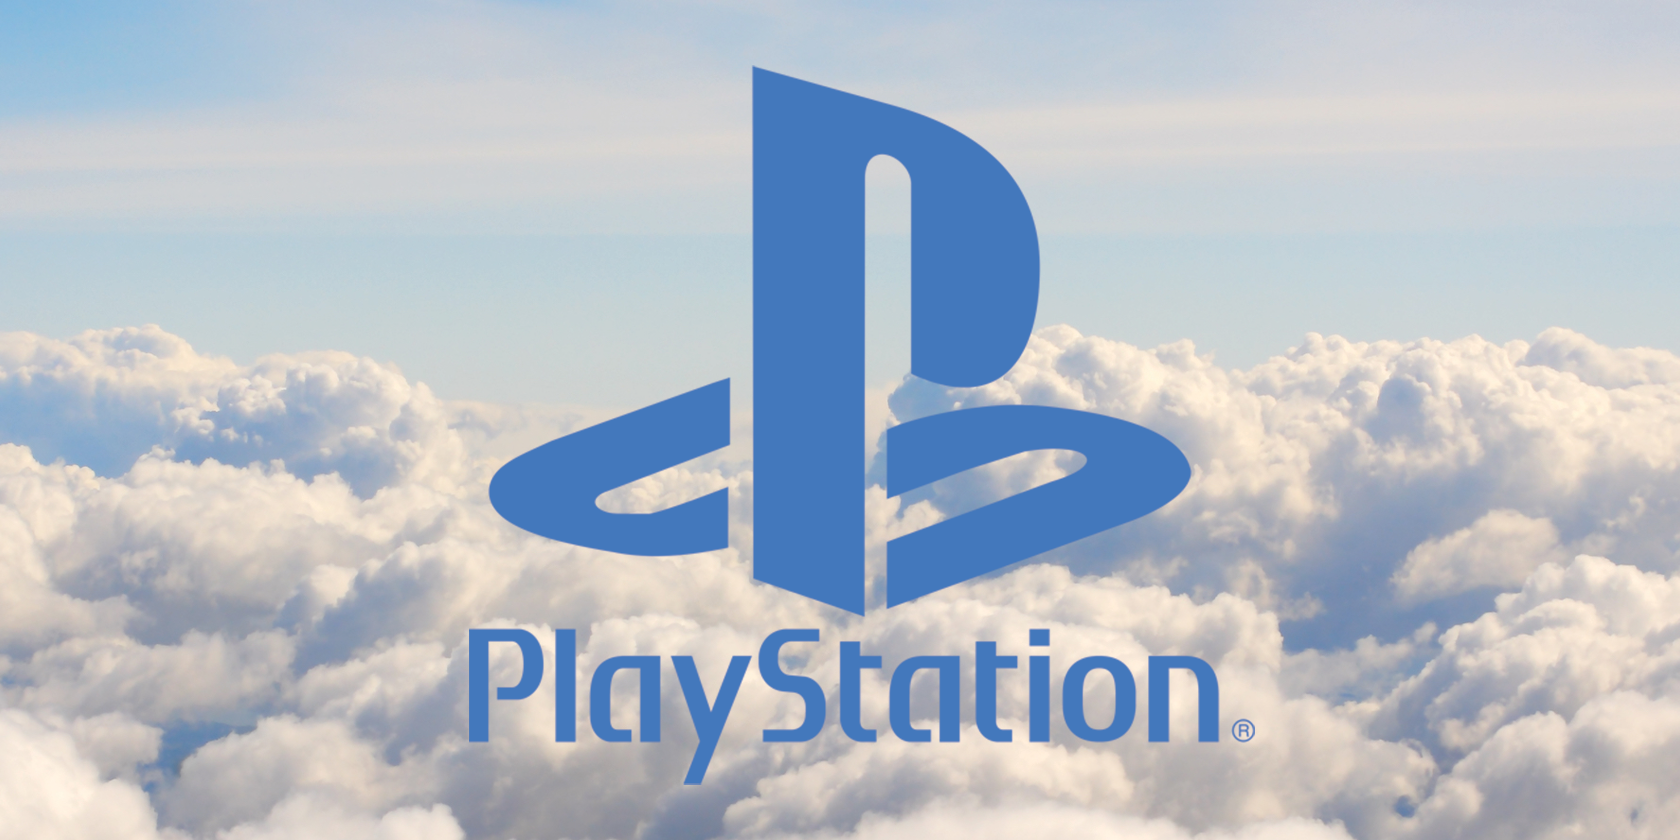 playstation logo with clouds